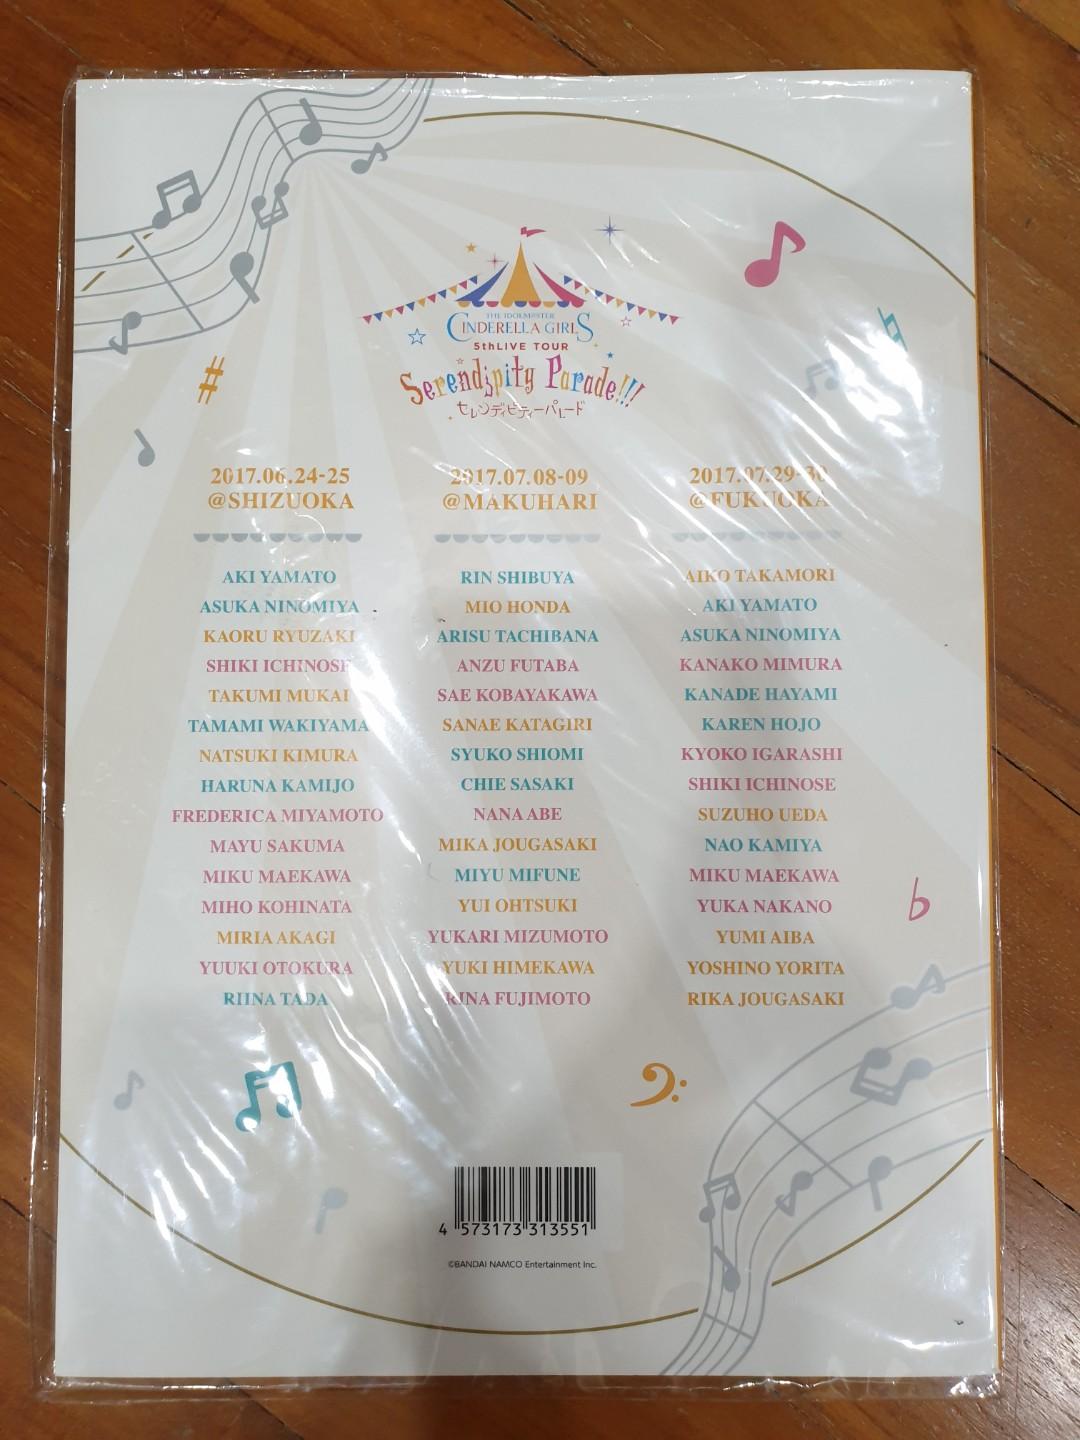 The Idolmaster Cinderella Girls 5th Live Tour Serendipity Parade Official Concert Book Entertainment J Pop On Carousell